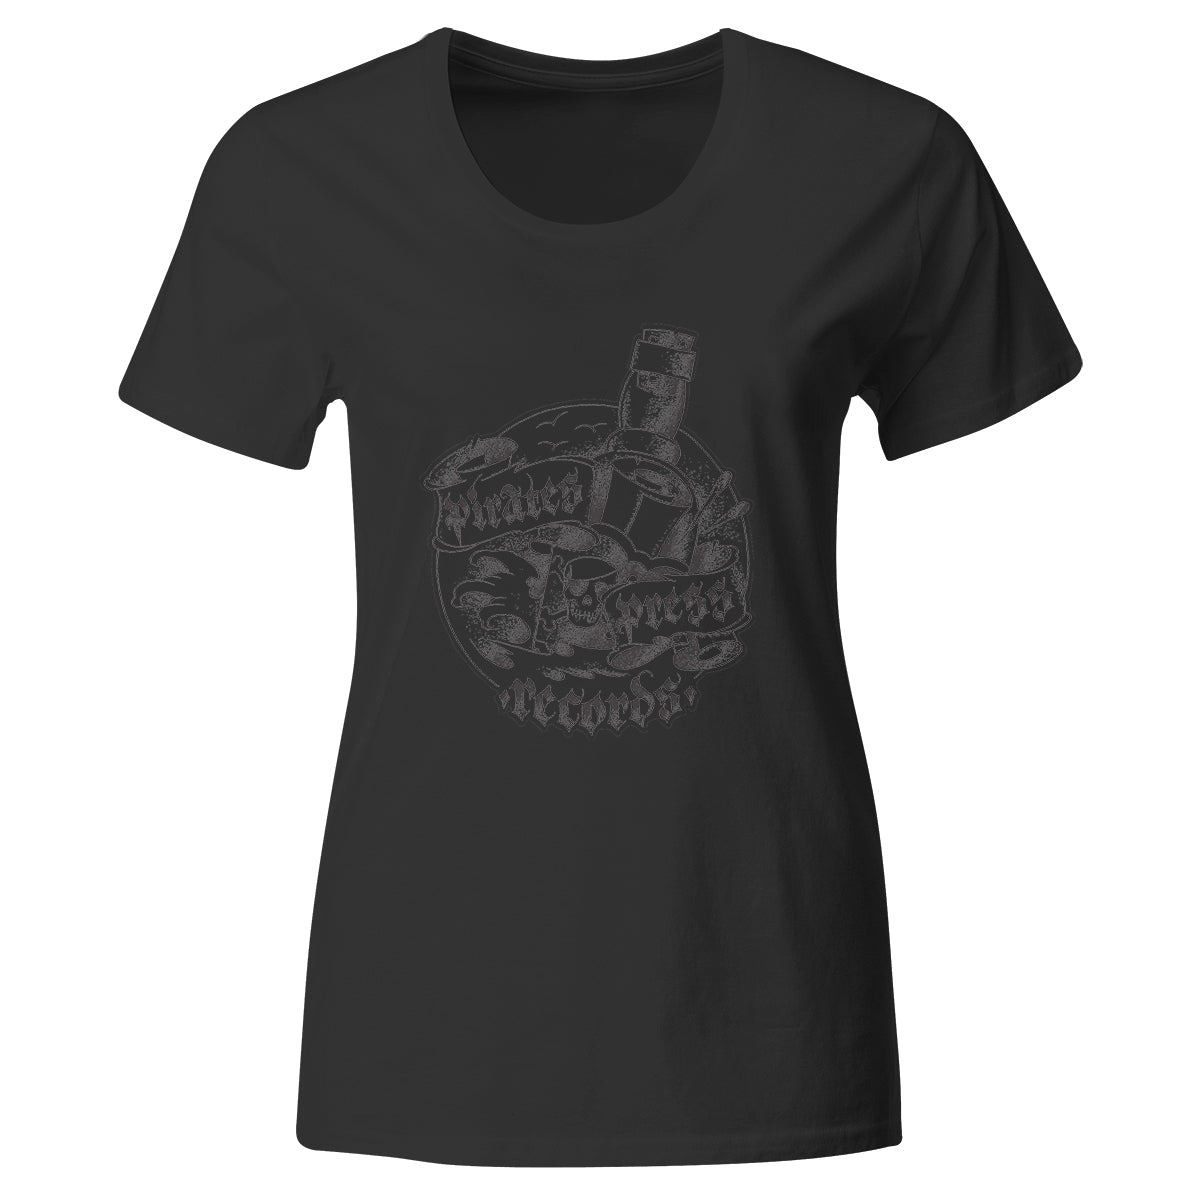 Pirates Press Records - Bottle - Black on Black - T-Shirt - Fitted